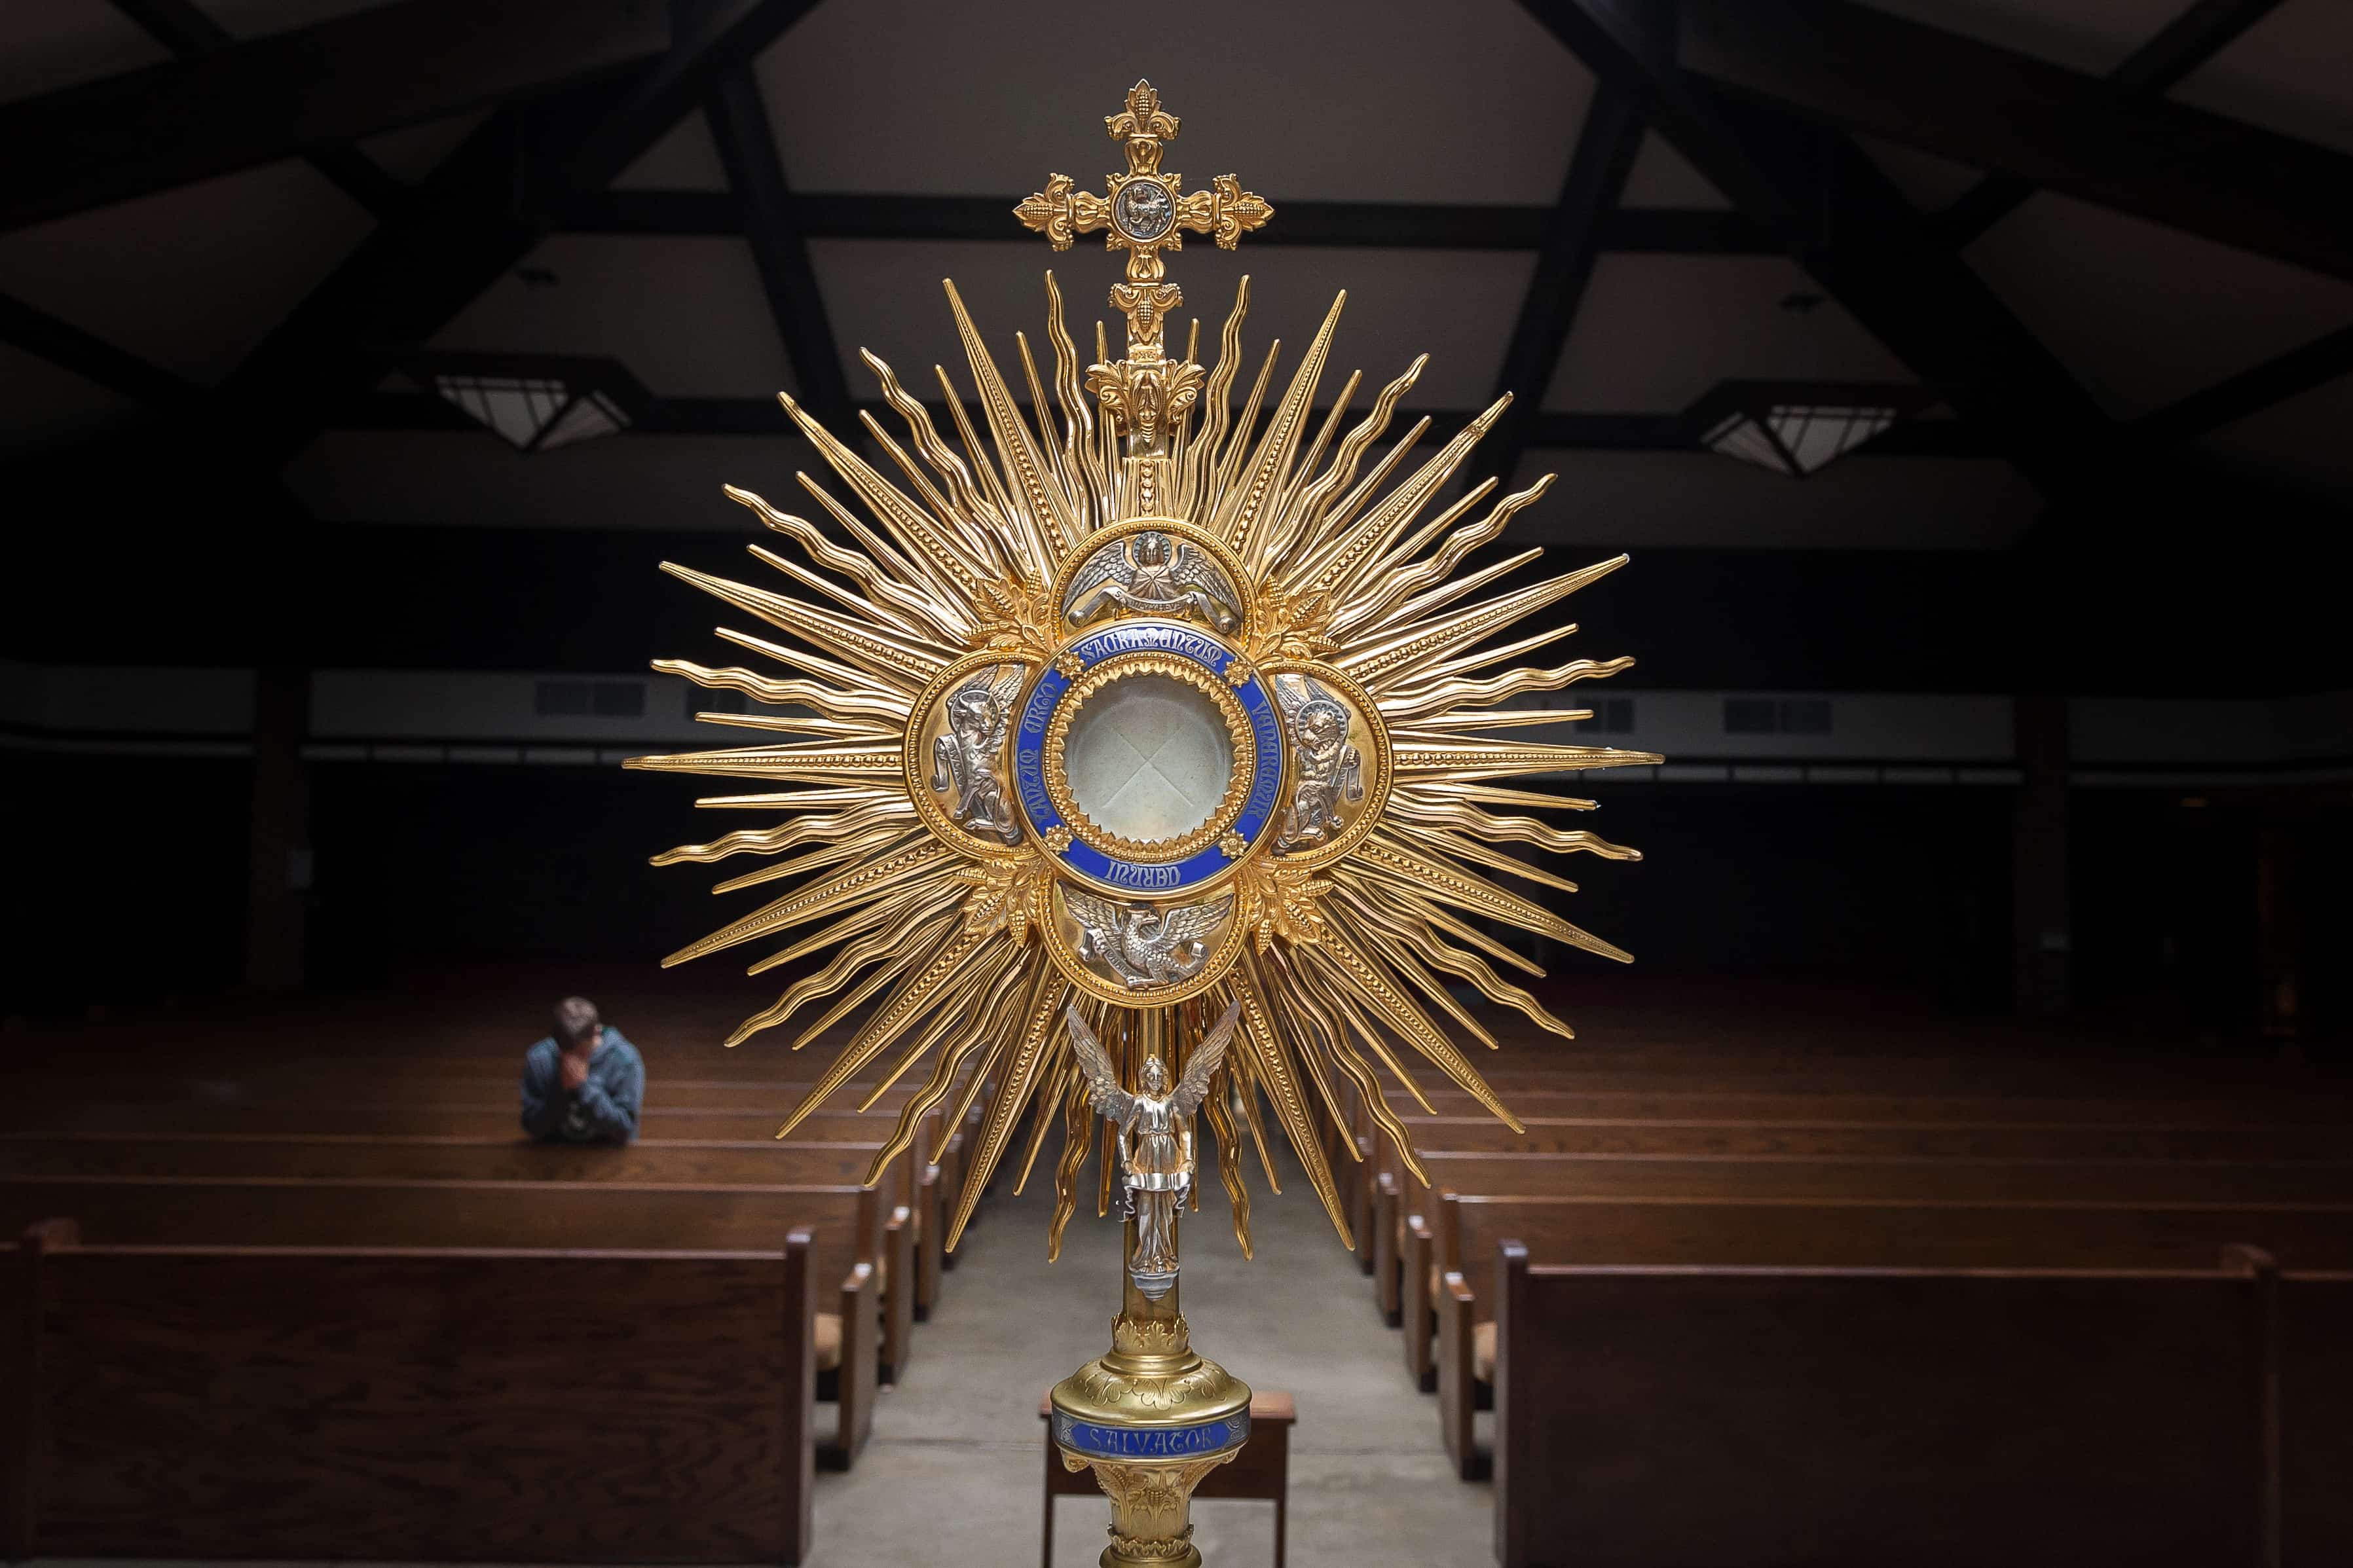 Monstrance with consecrated host in it with man kneeling in background